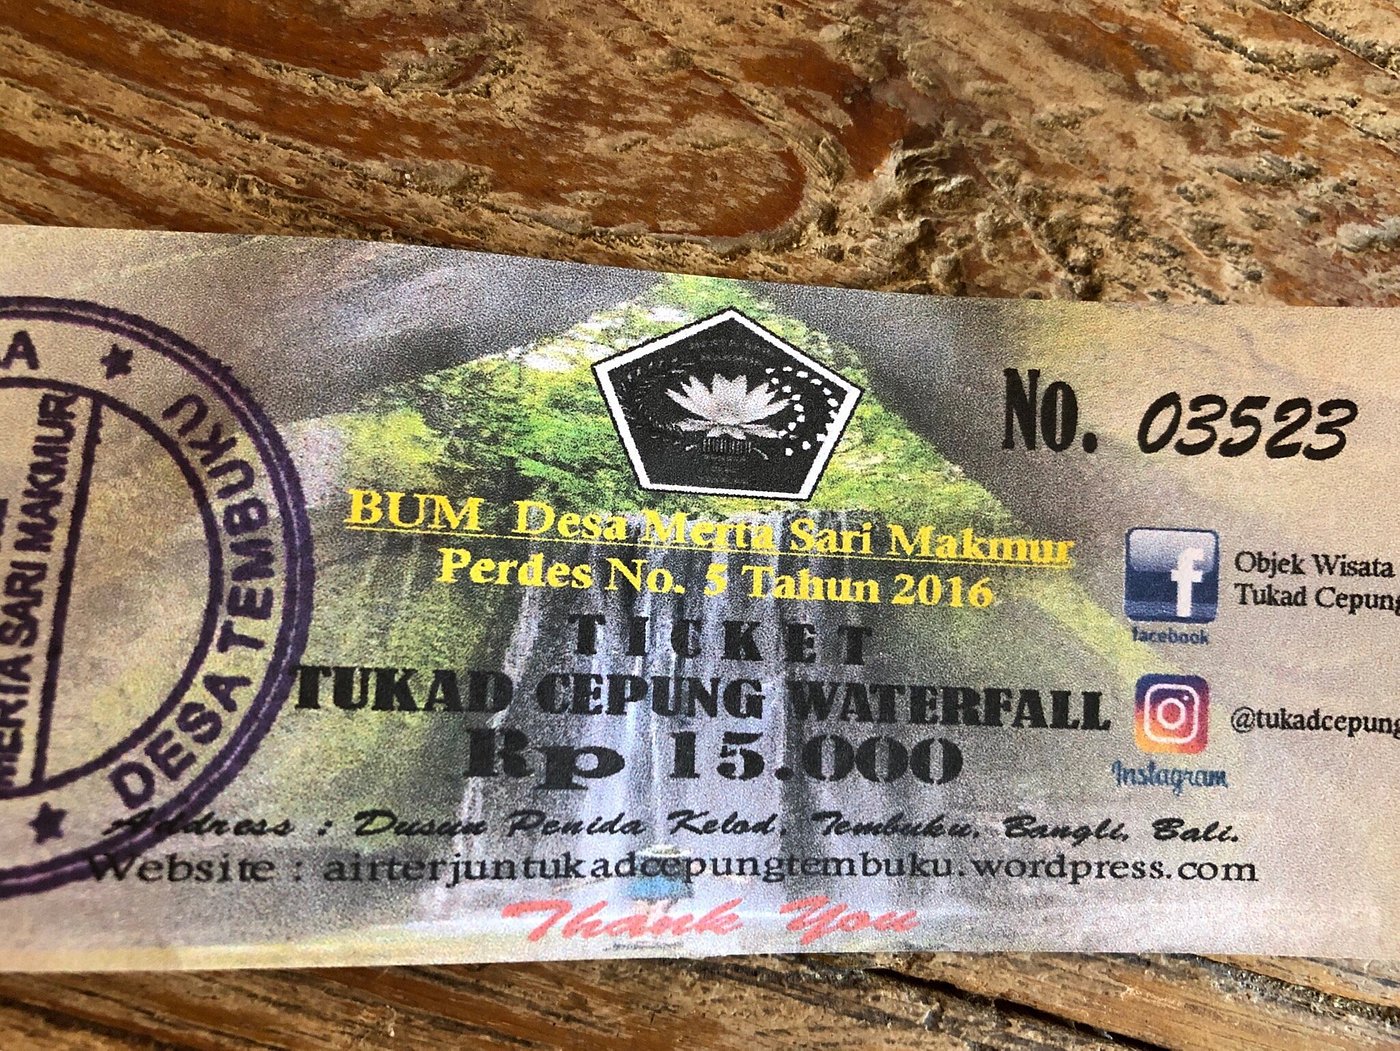 Ticket to the waterfall